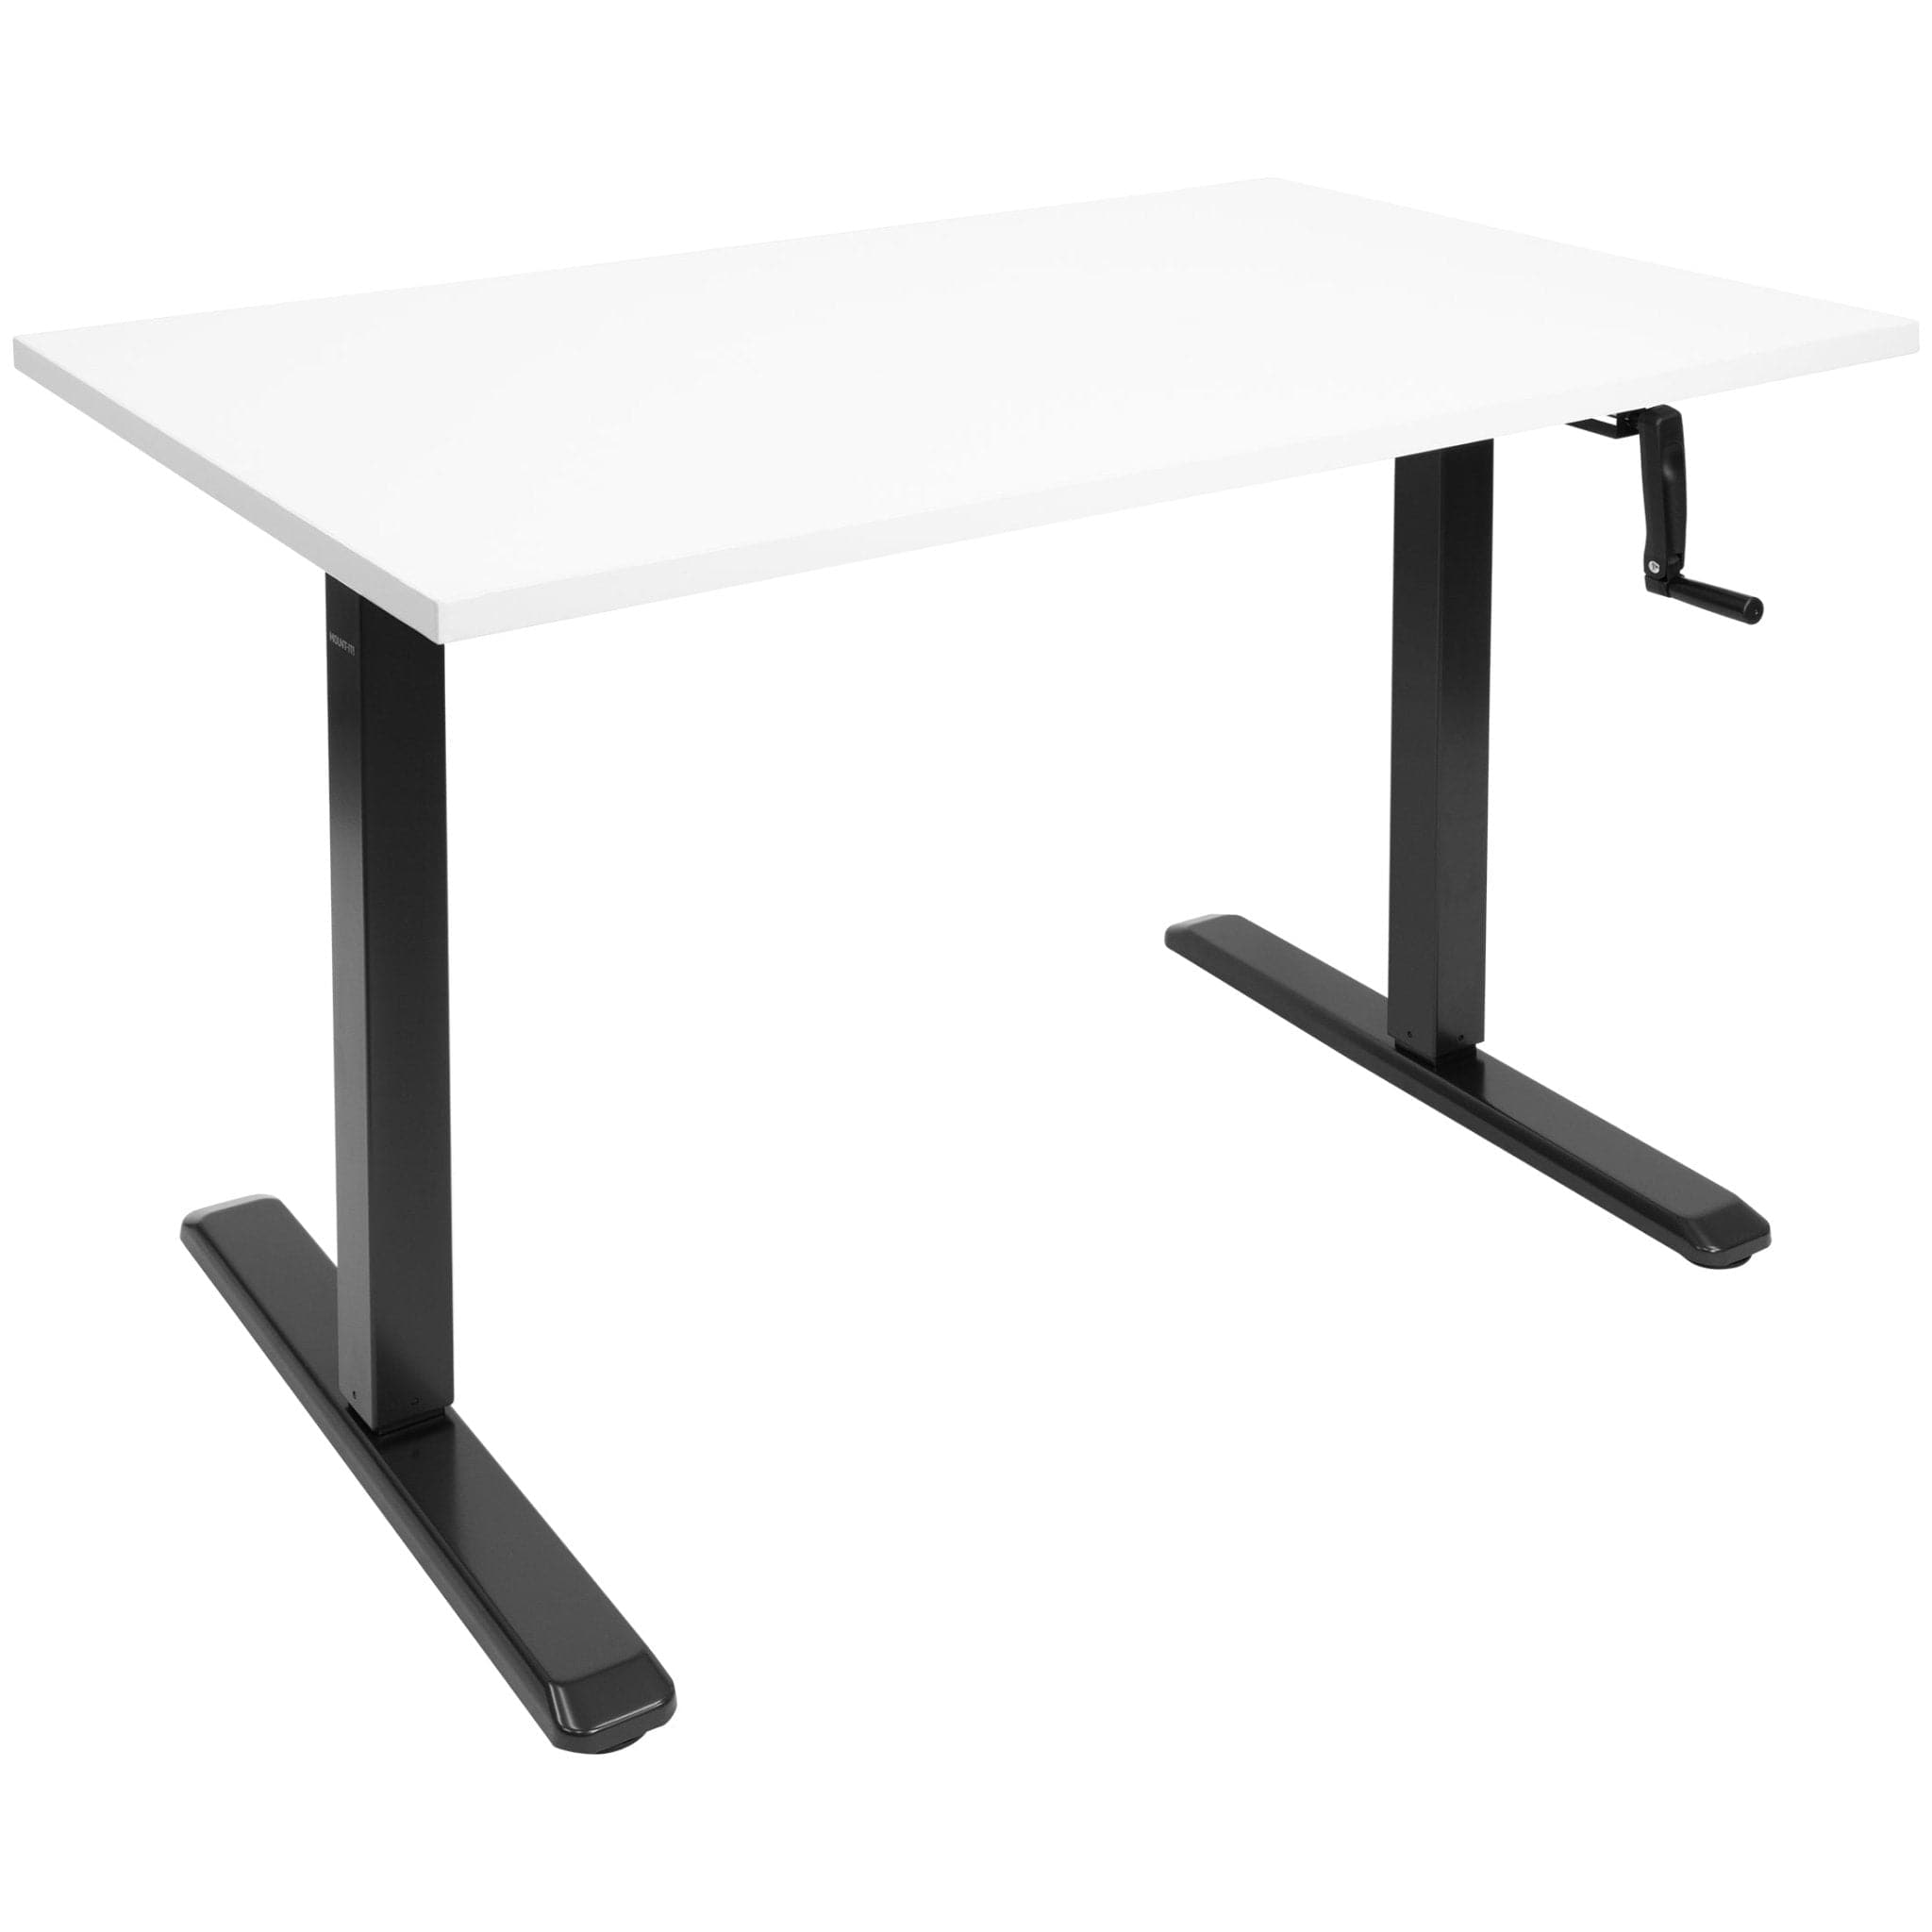 Hand Crank Sit-Stand Black Desk Frame with White Tabletop - Mount-It!